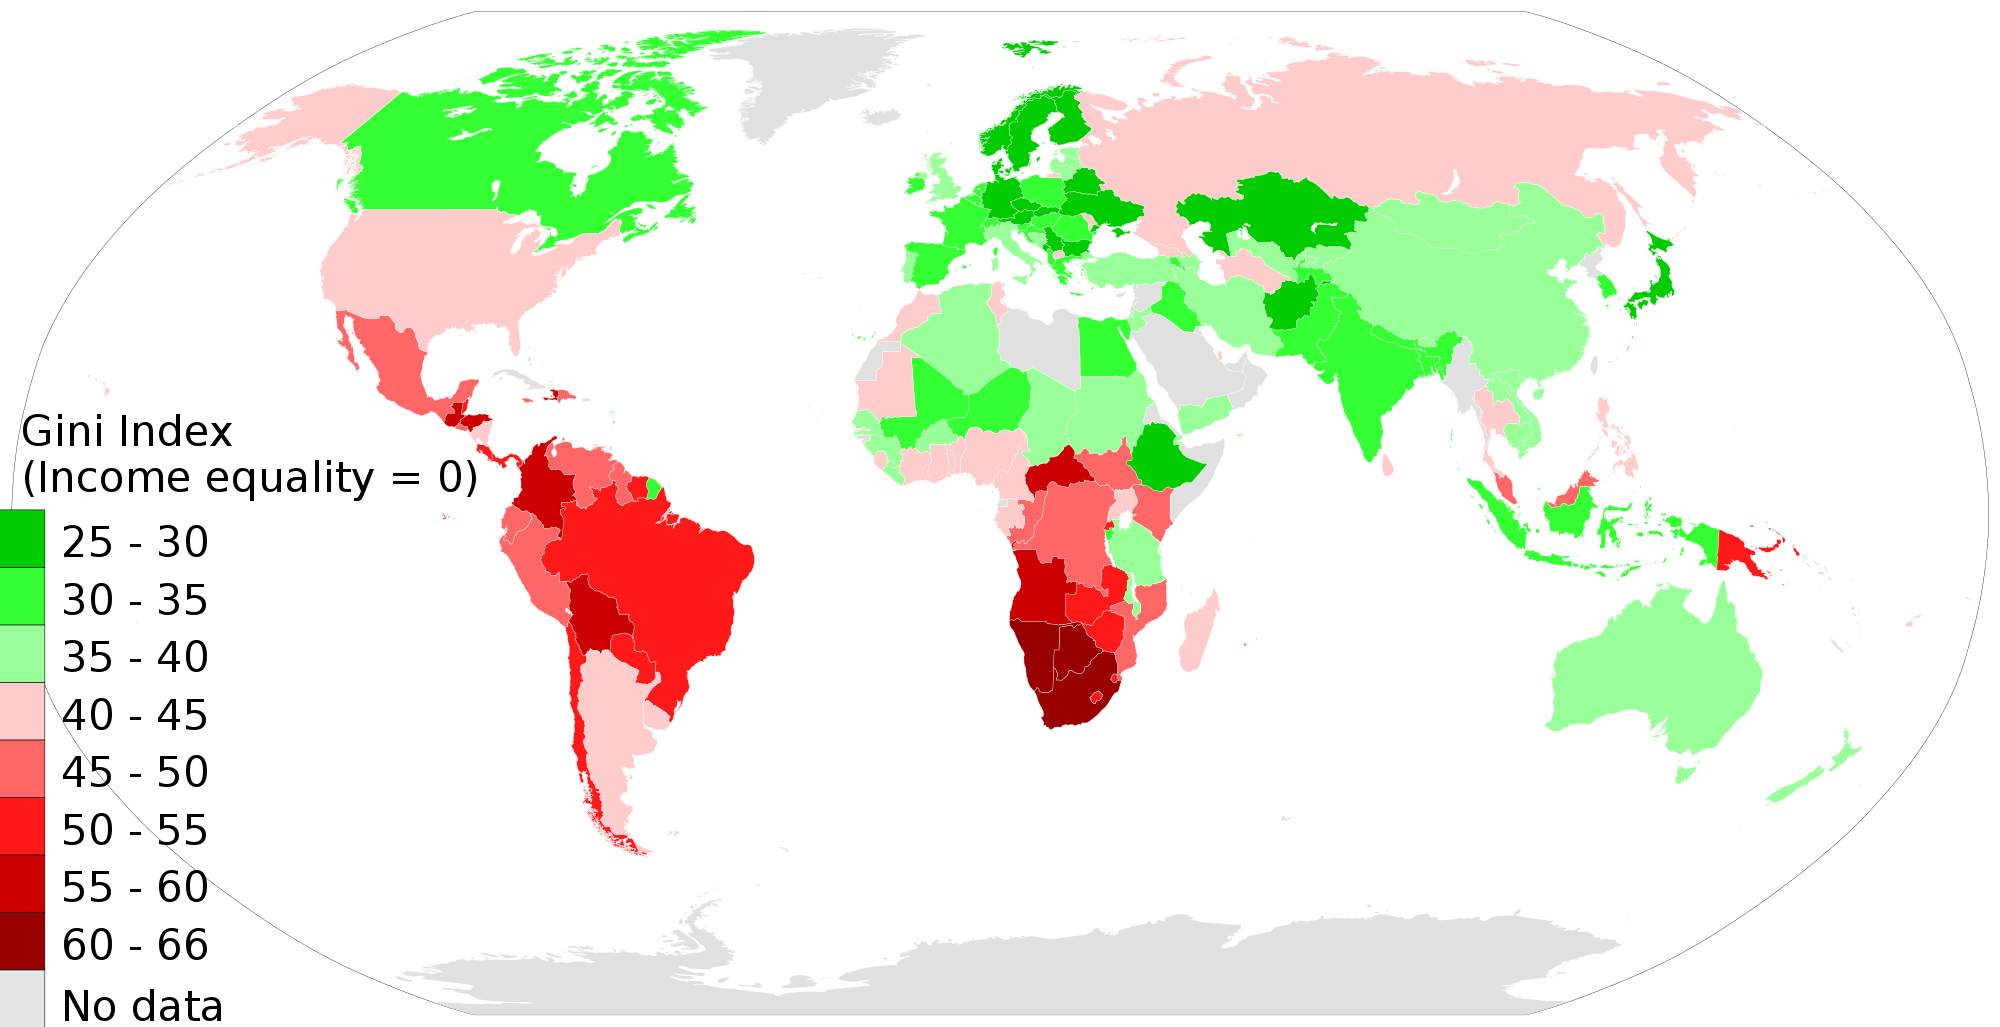 2000px-2014_Gini_Index_World_Map,_income_inequality_distribution_by_country_per_World_Bank.svg.png